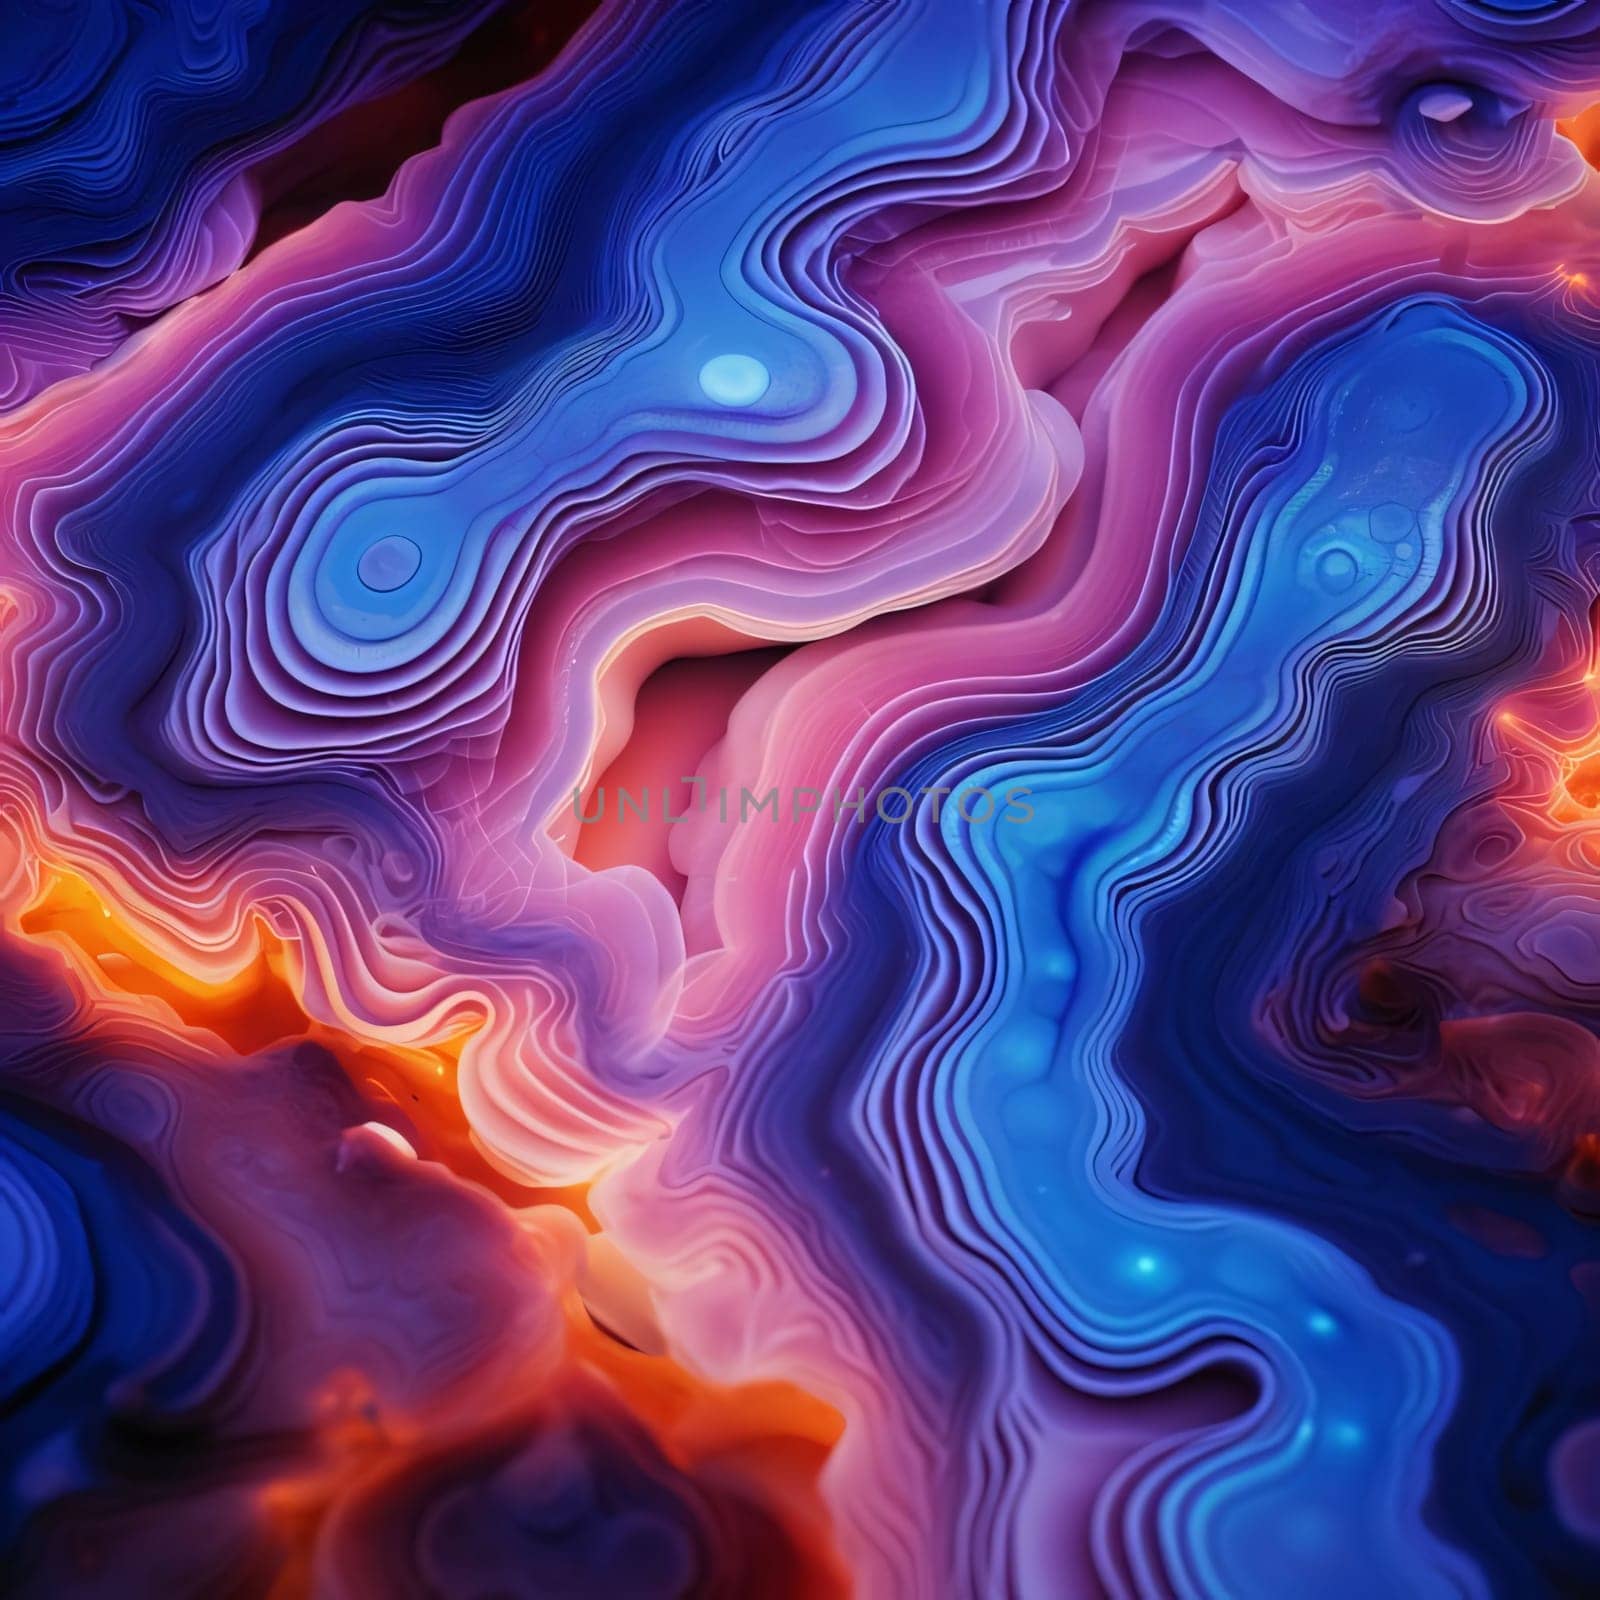 Abstract background design: Psychedelic abstract pattern and hypnotic background texture, computer generated images